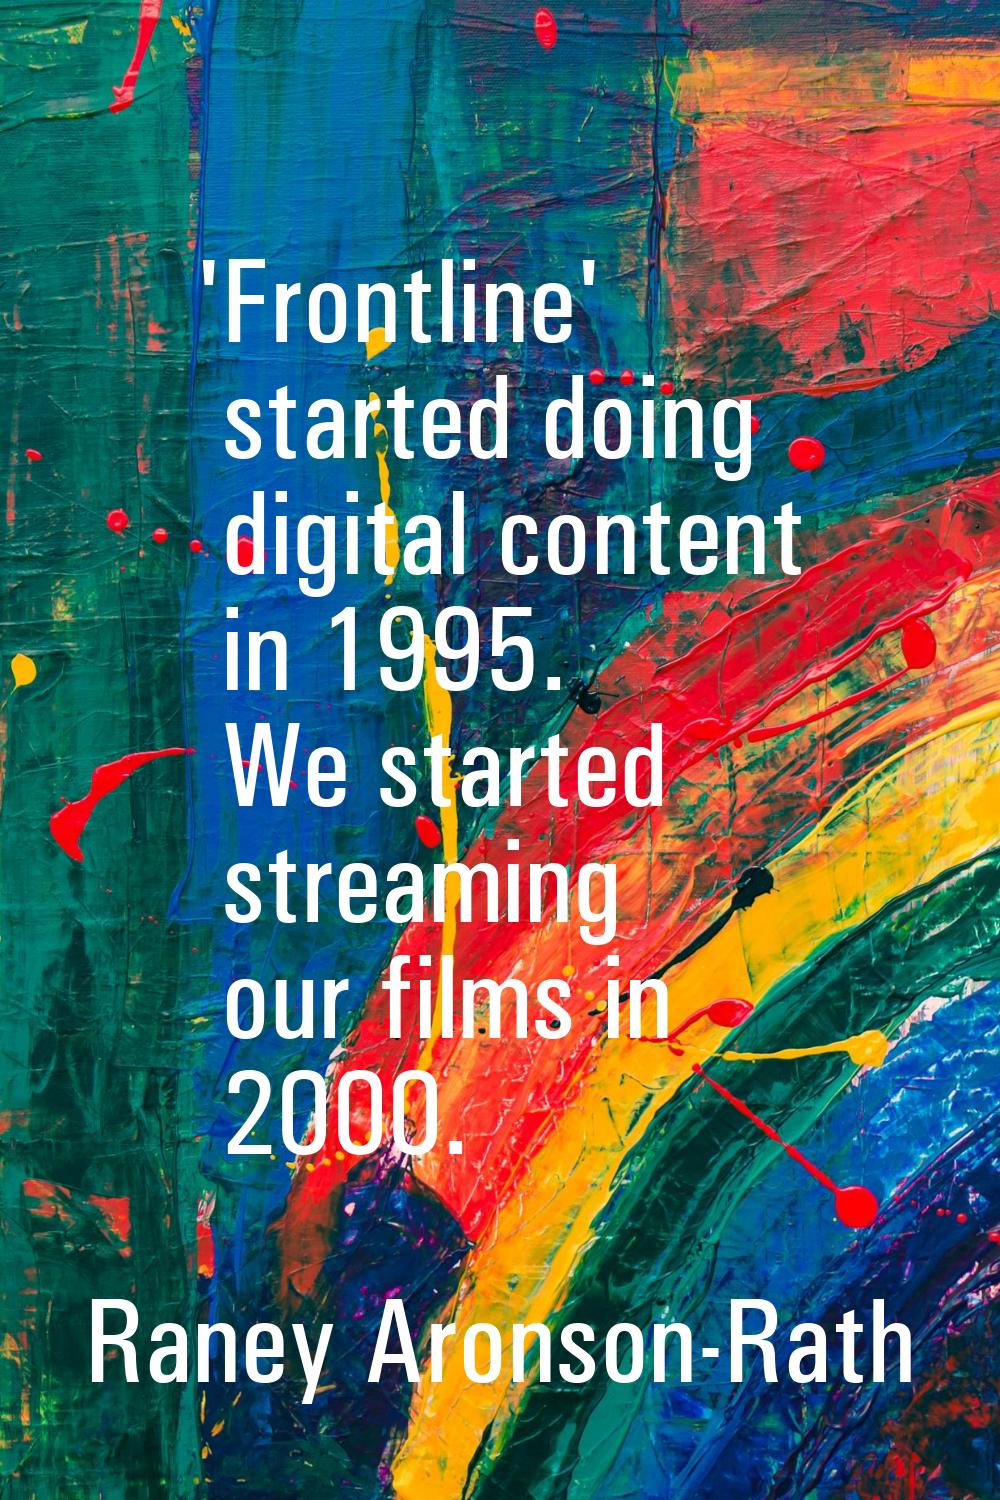 'Frontline' started doing digital content in 1995. We started streaming our films in 2000.